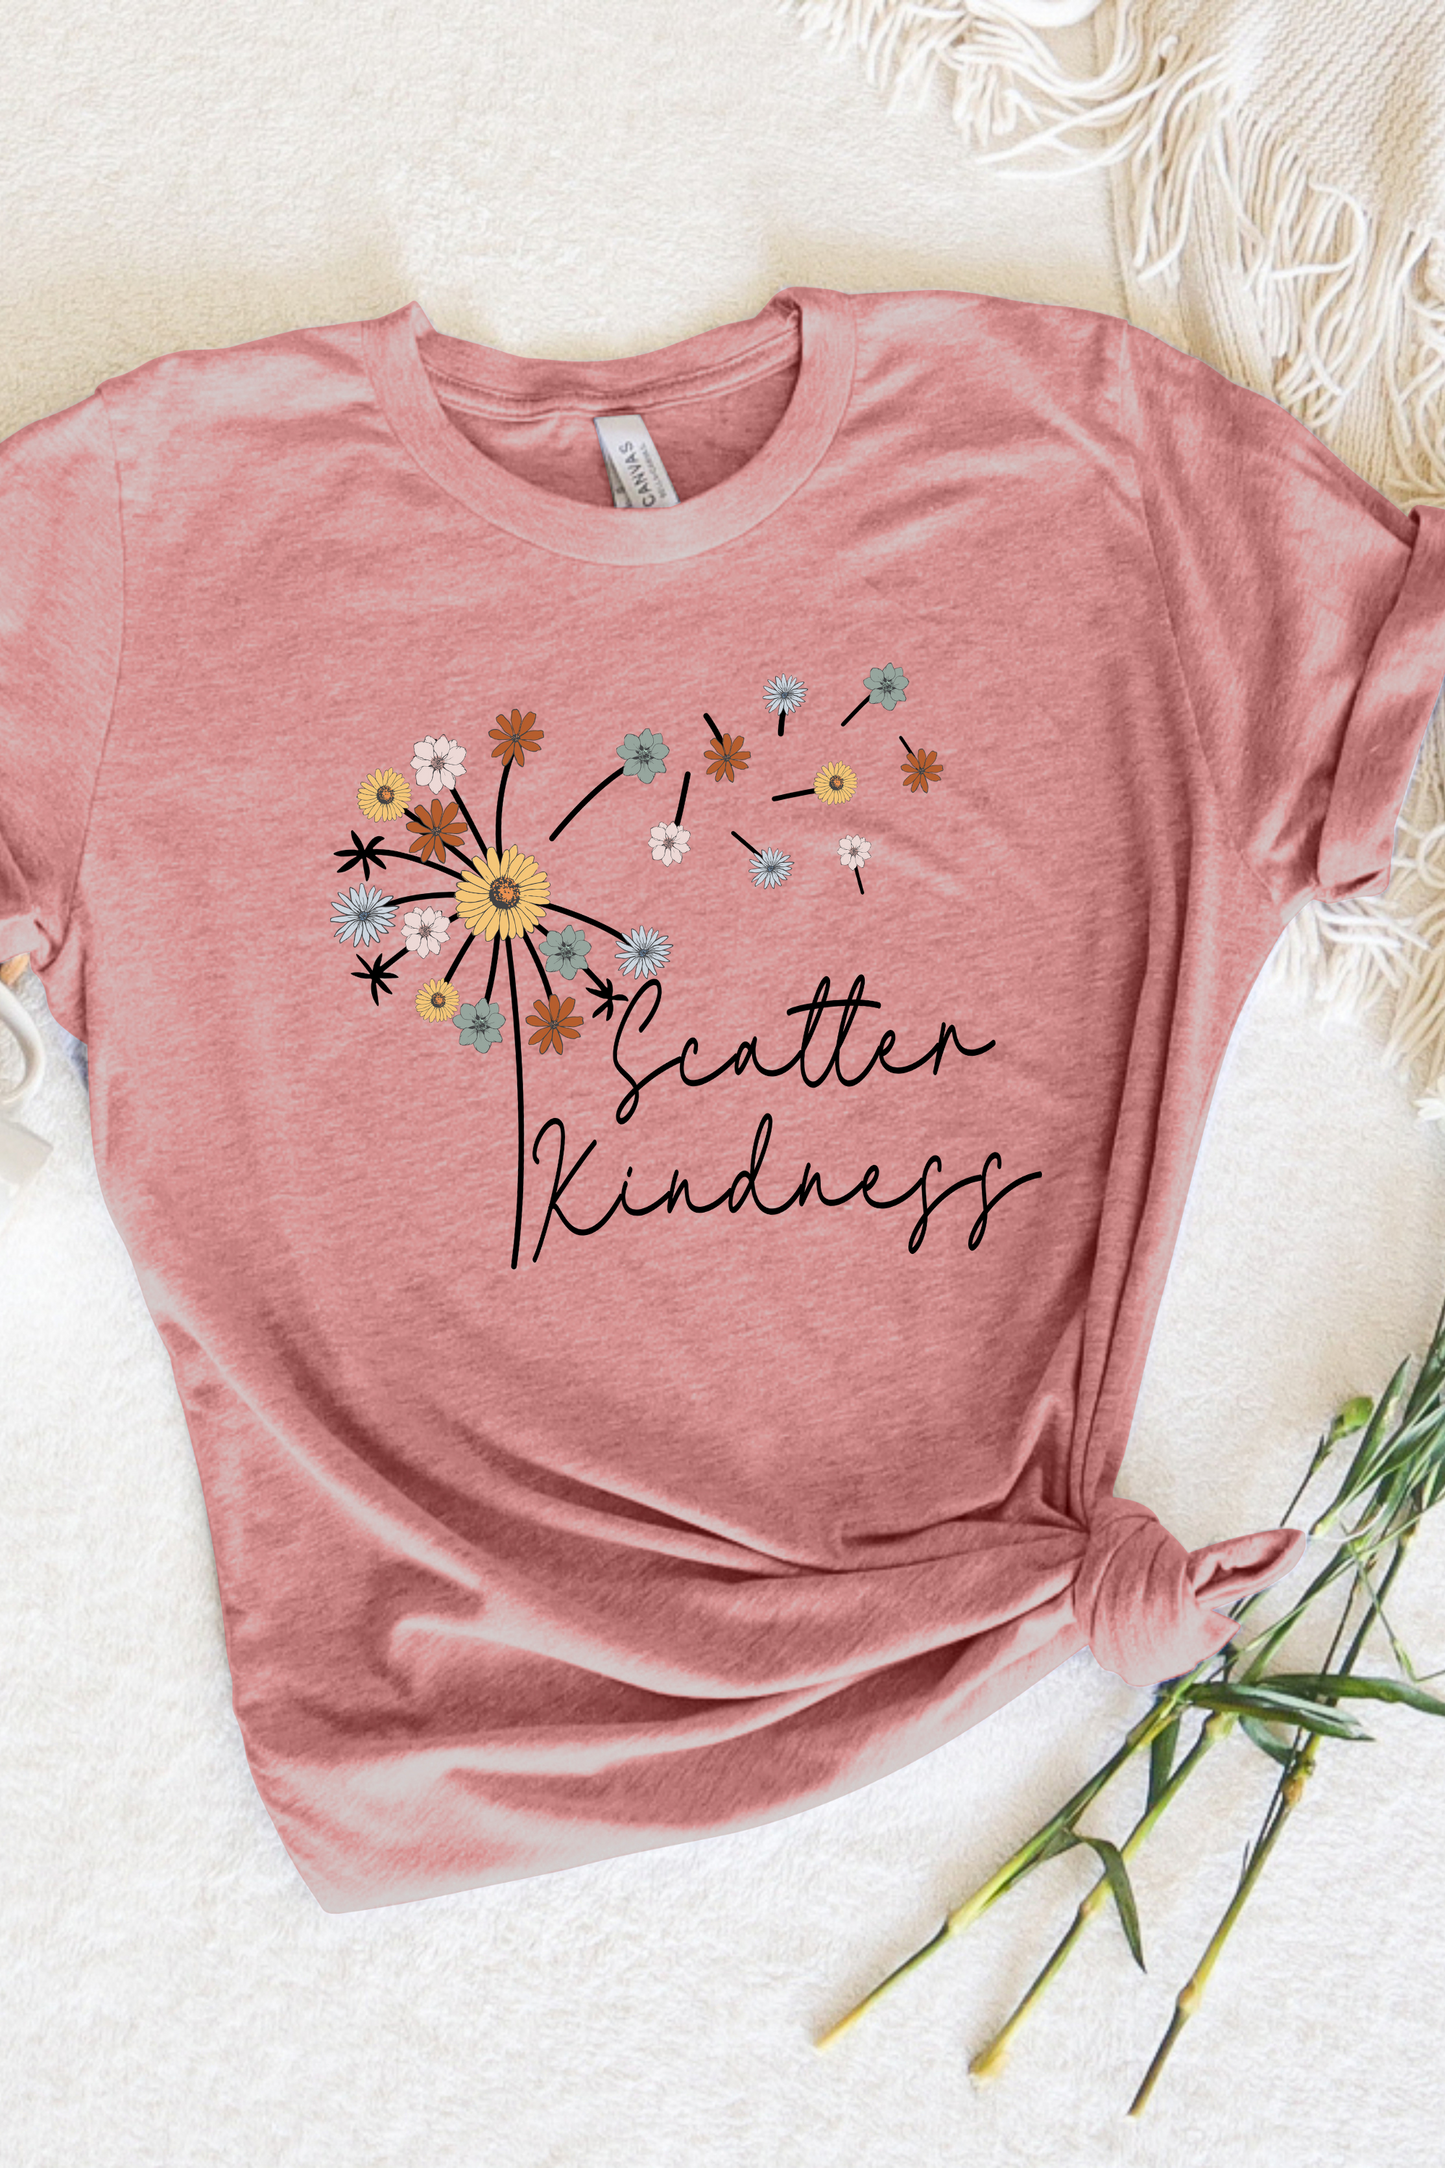 SCATTER KINDNESS POSITIVES VIBES TEE(BELLA CANVAS)